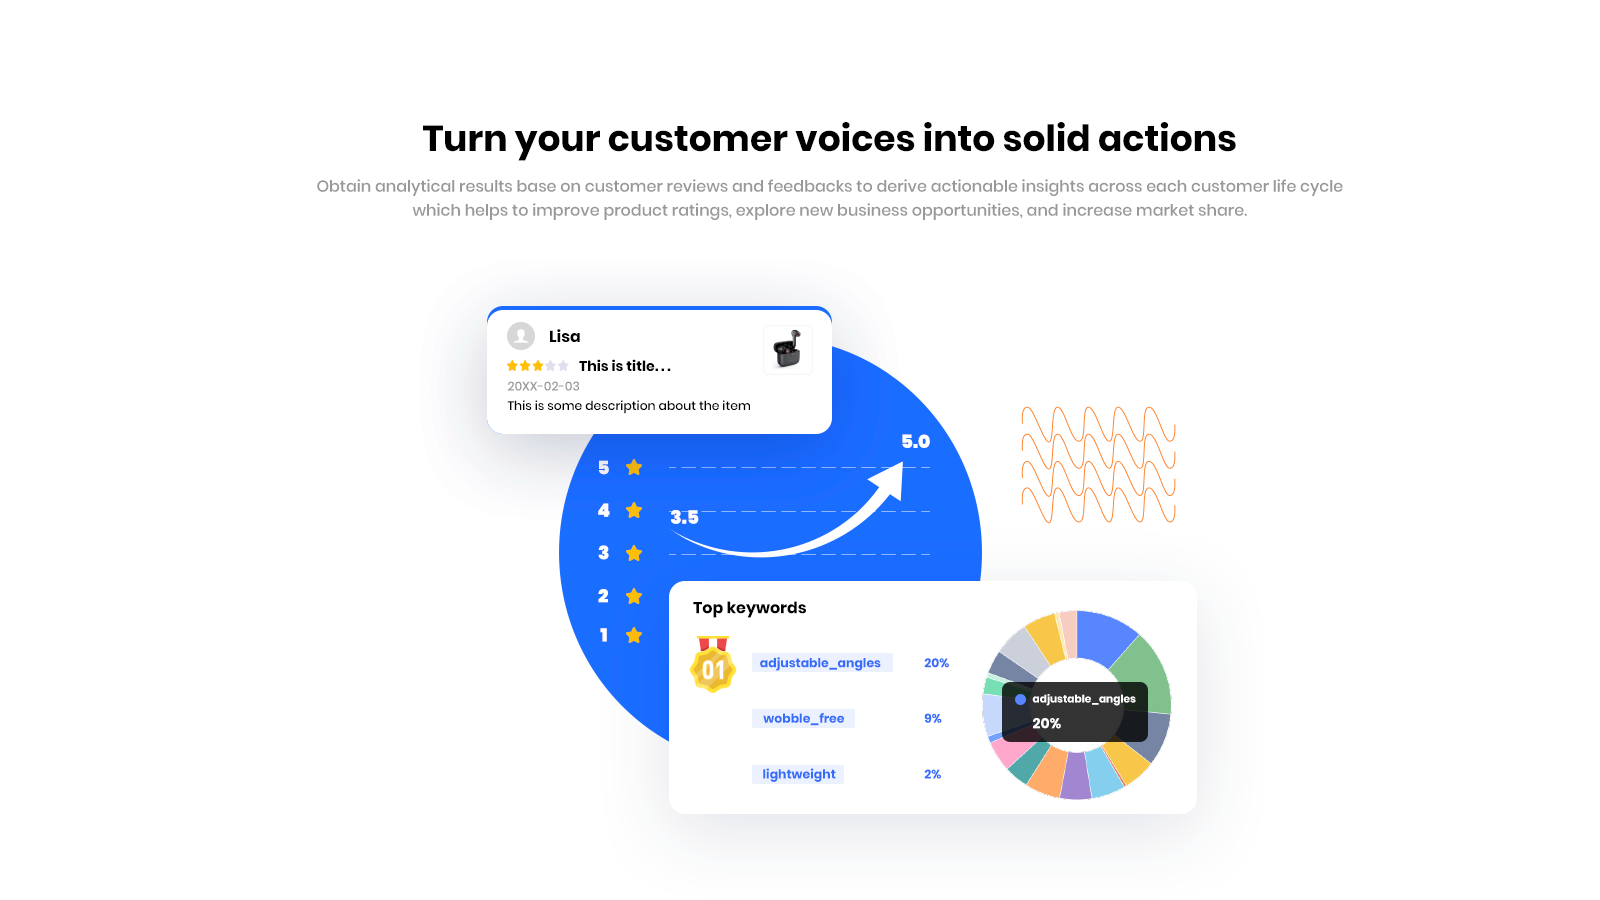 Turn your customer voices into solid actions